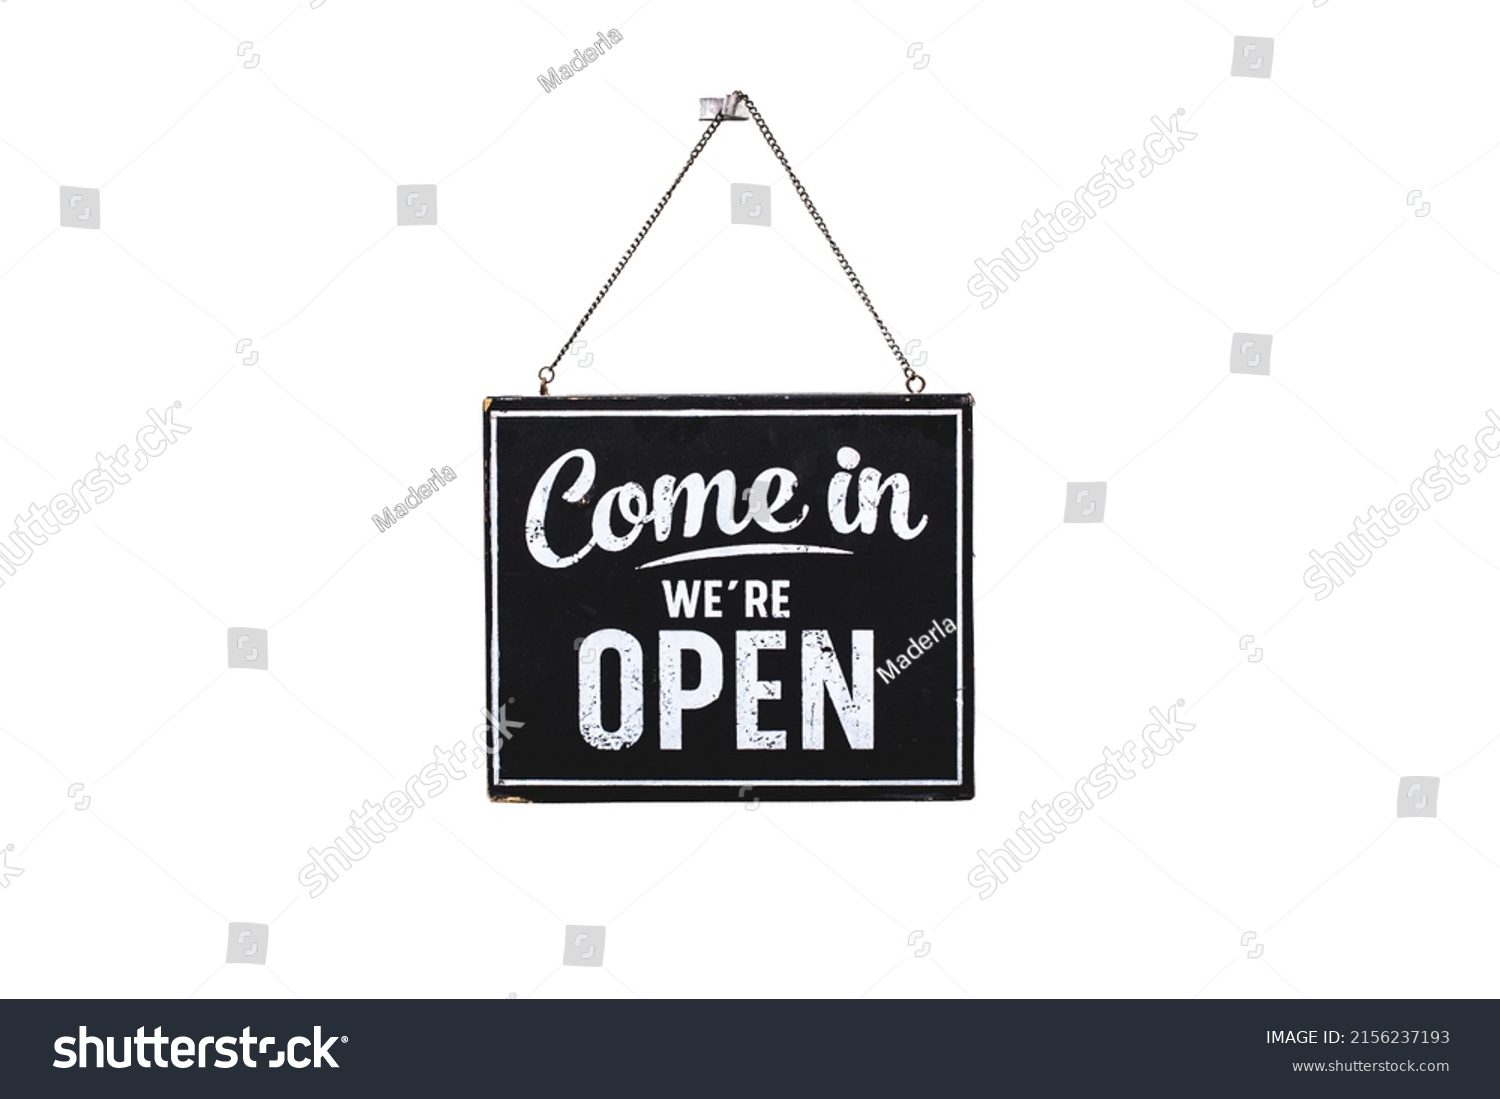 Text on vintage black sign "Come in we're open" isolated on white background,With clipping path. #2156237193